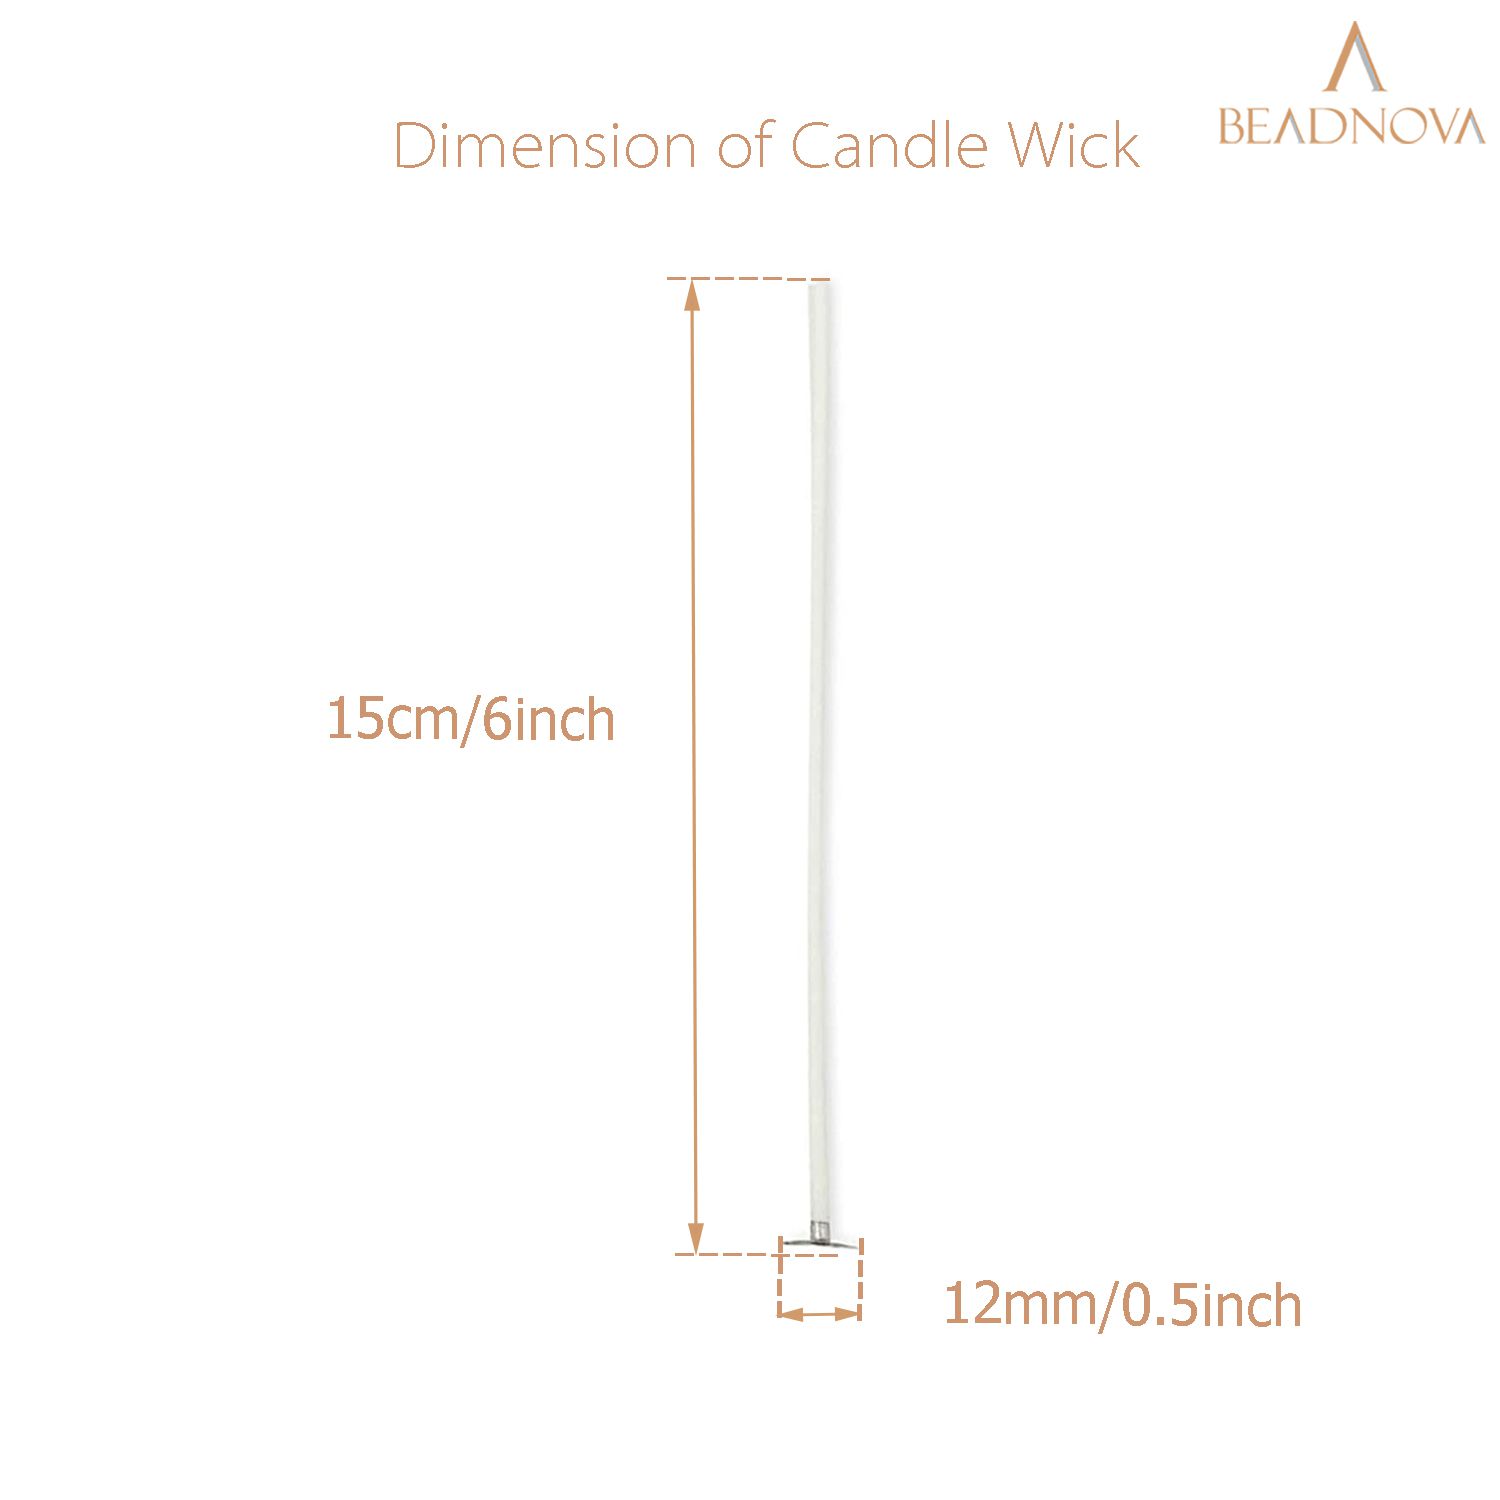 BEADNOVA Candle Wicks 6 Inch 150pcs Large Candle String Cotton Candle Wicks  for Candle Making DIY - Beadnova